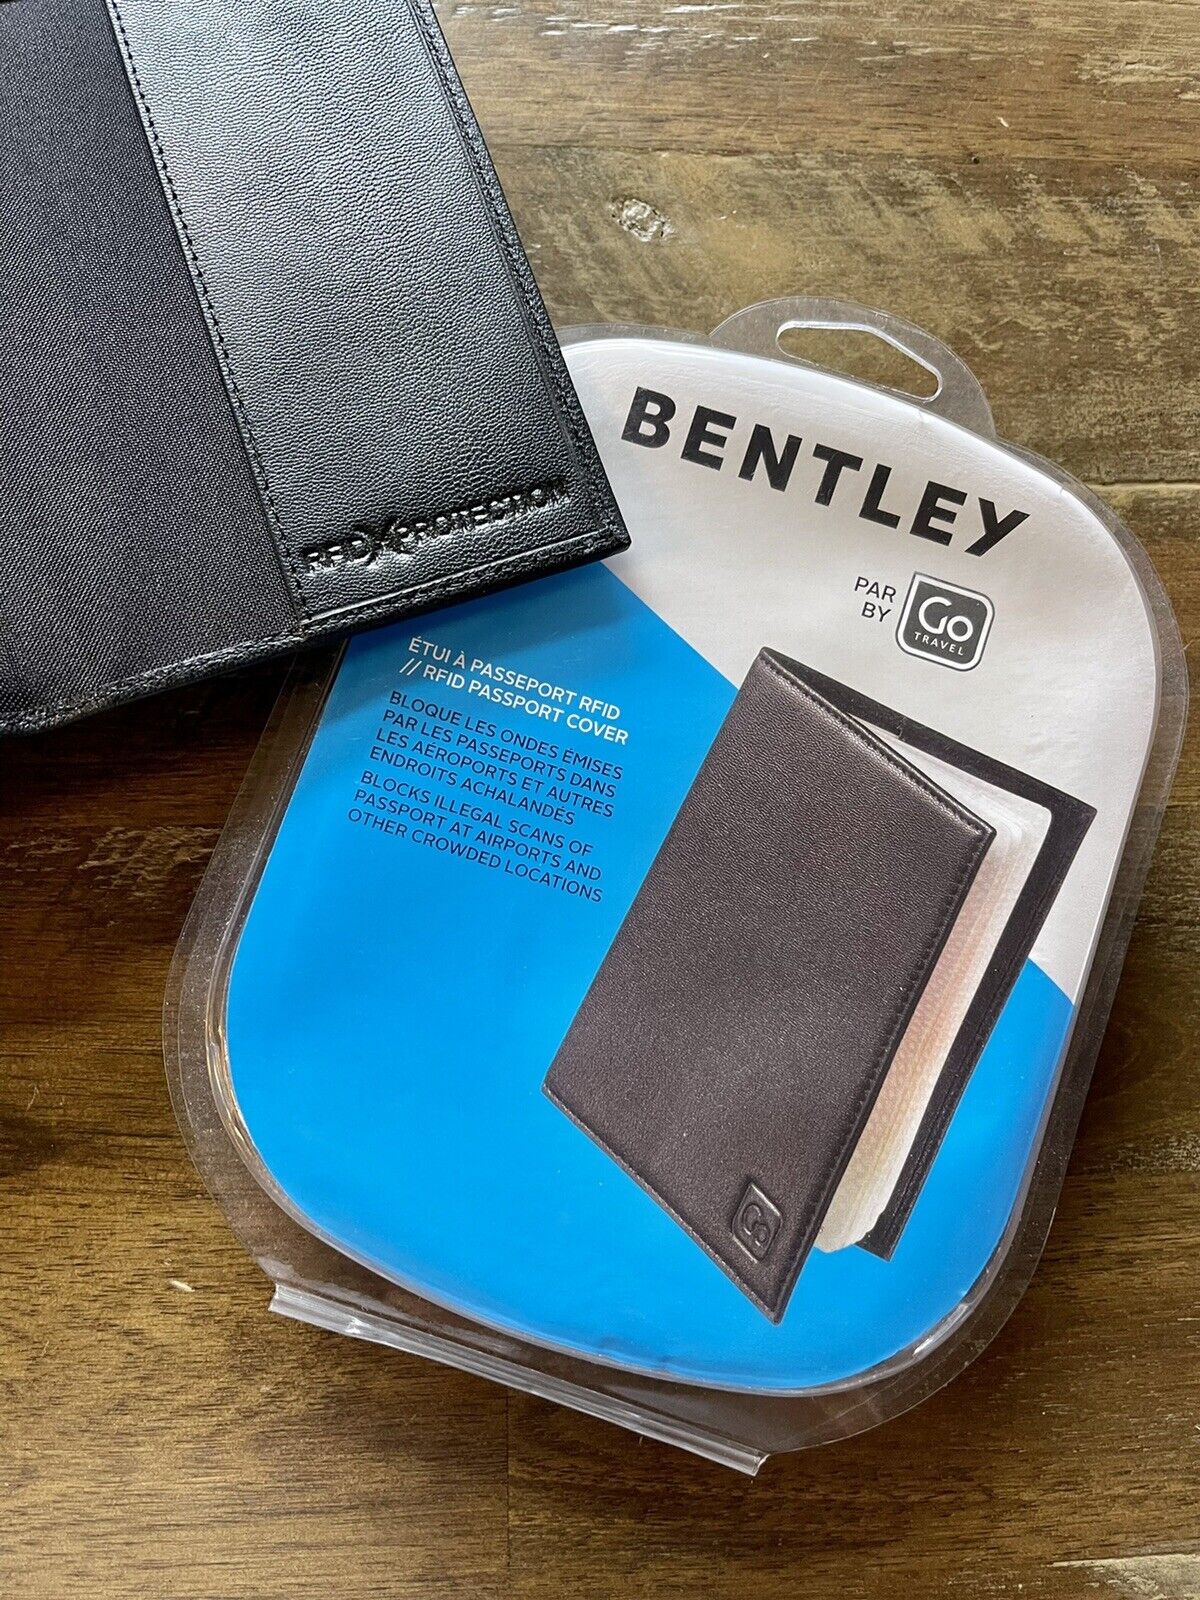 BENTLEY RFID PASSPORT COVER BLACK SOFT LEATHER BY GO TRAVEL